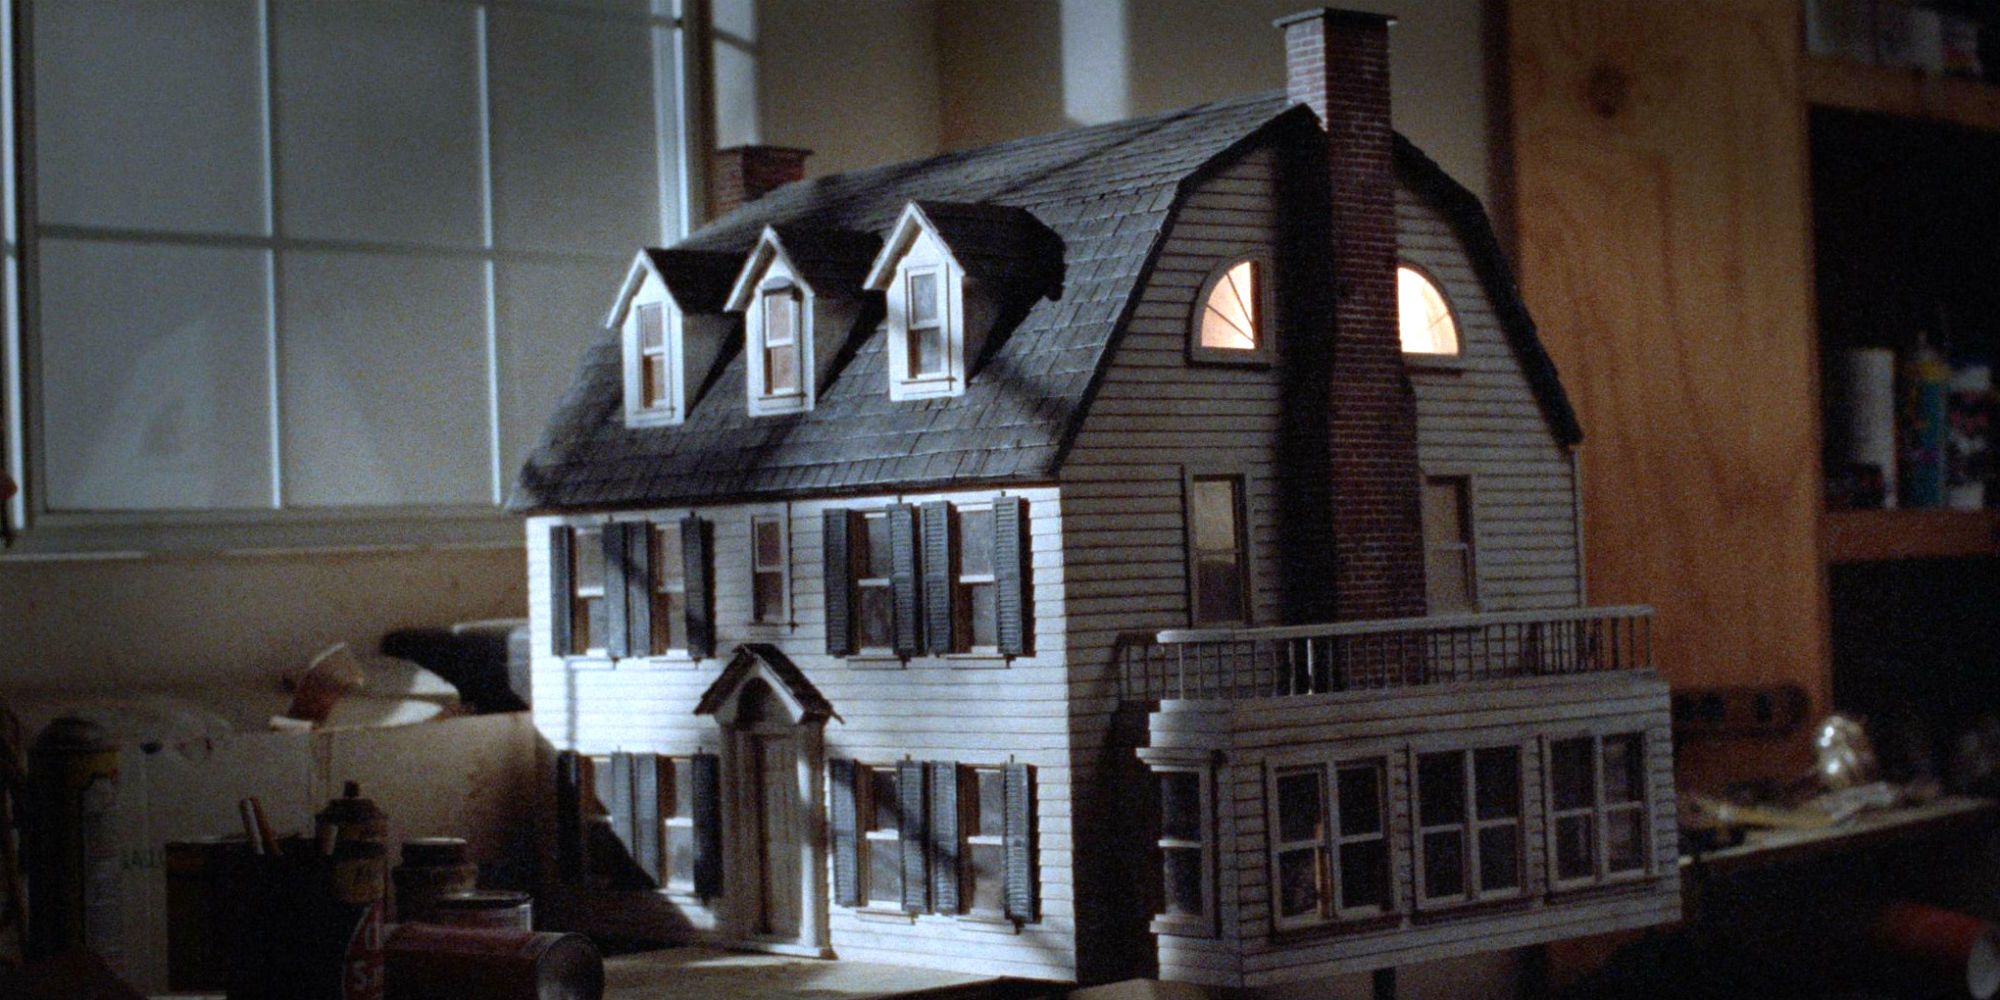 Light shines through the upstairs windows of the dollhouse in Amityville Dollhouse